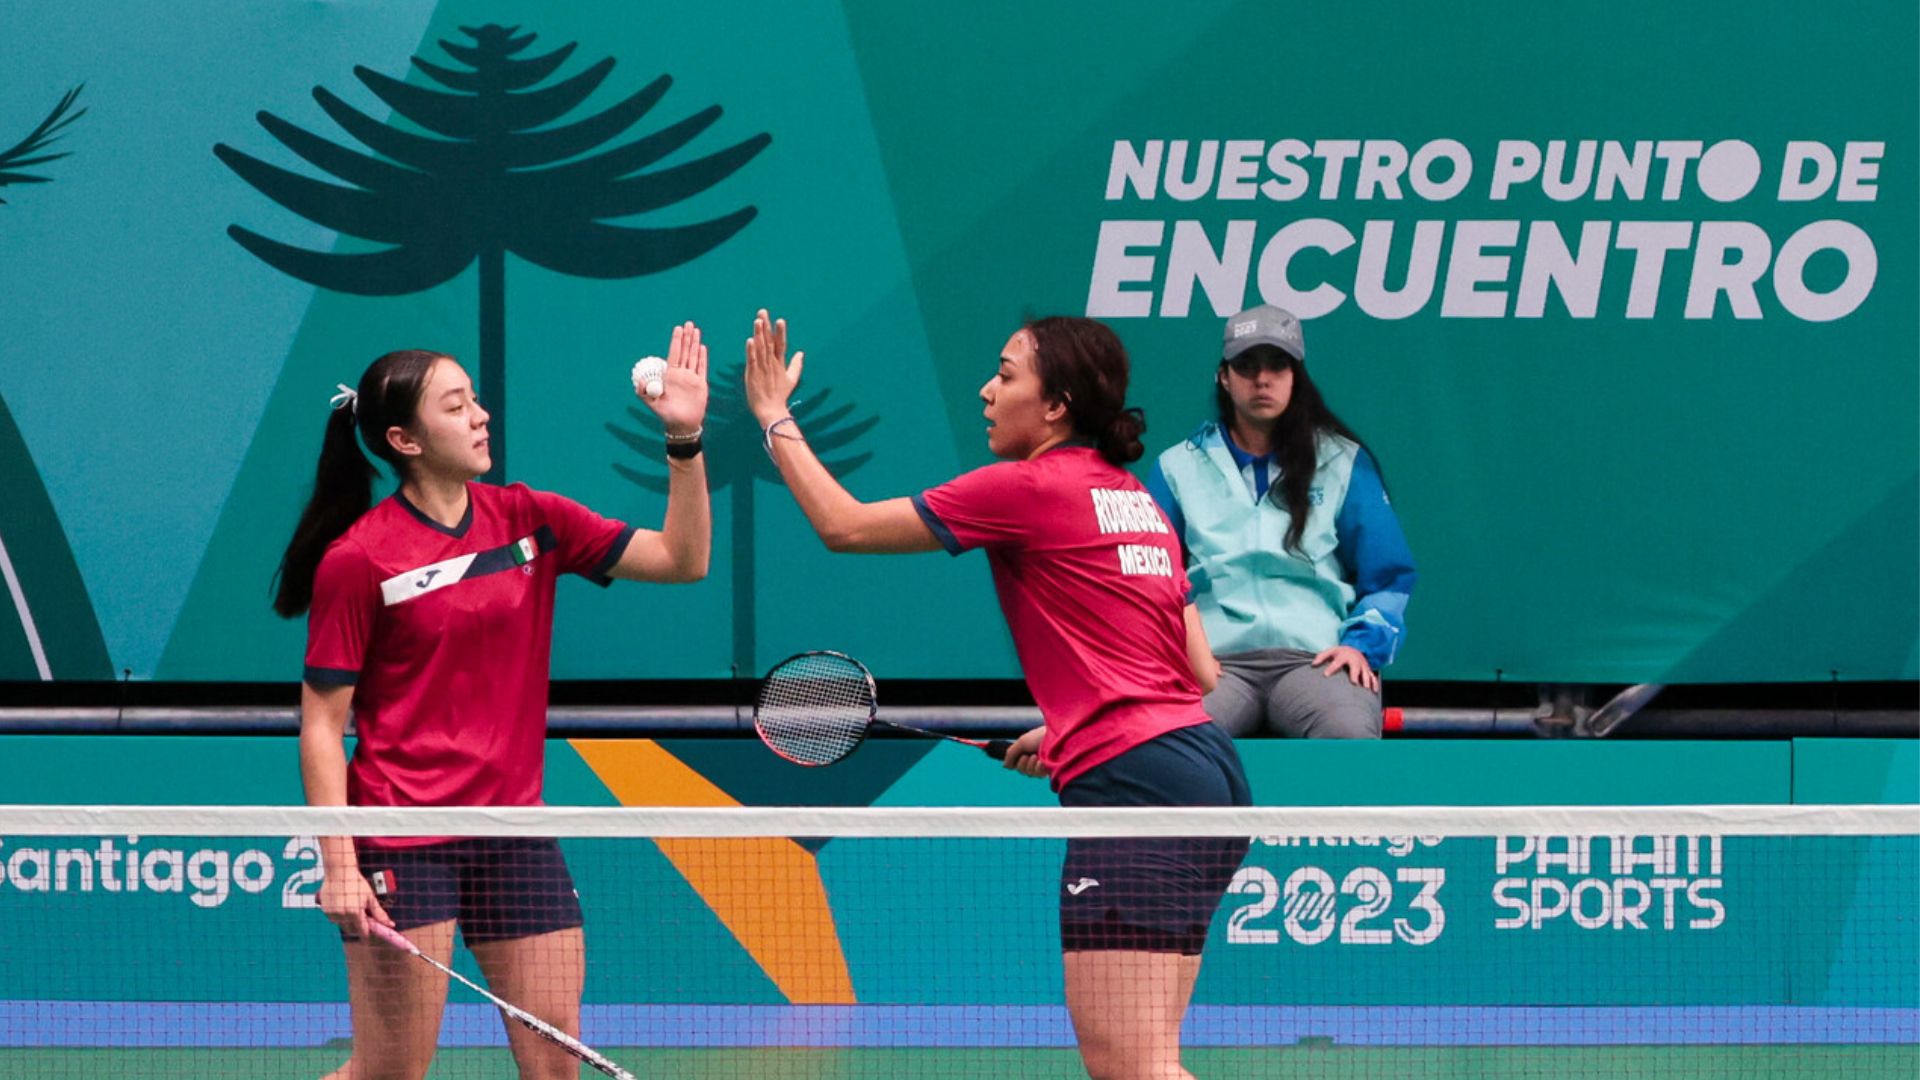 Mexico was the big winner in badminton on Monday morning